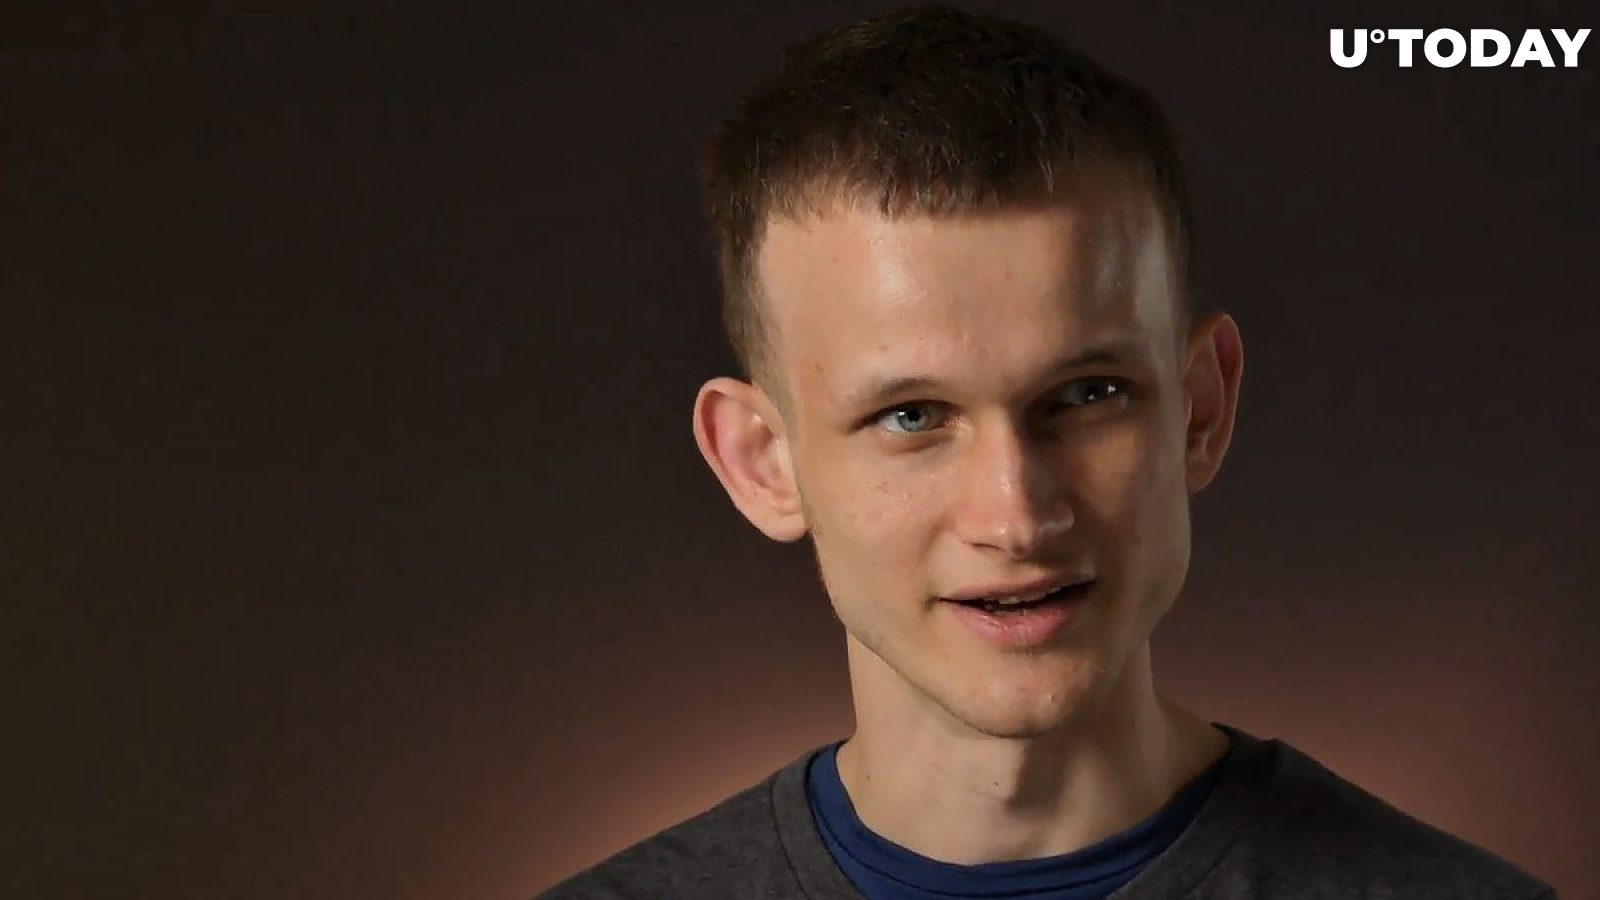 Ethereum Founder Vitalik Buterin Says Crypto Space Should Expand Beyond Finance